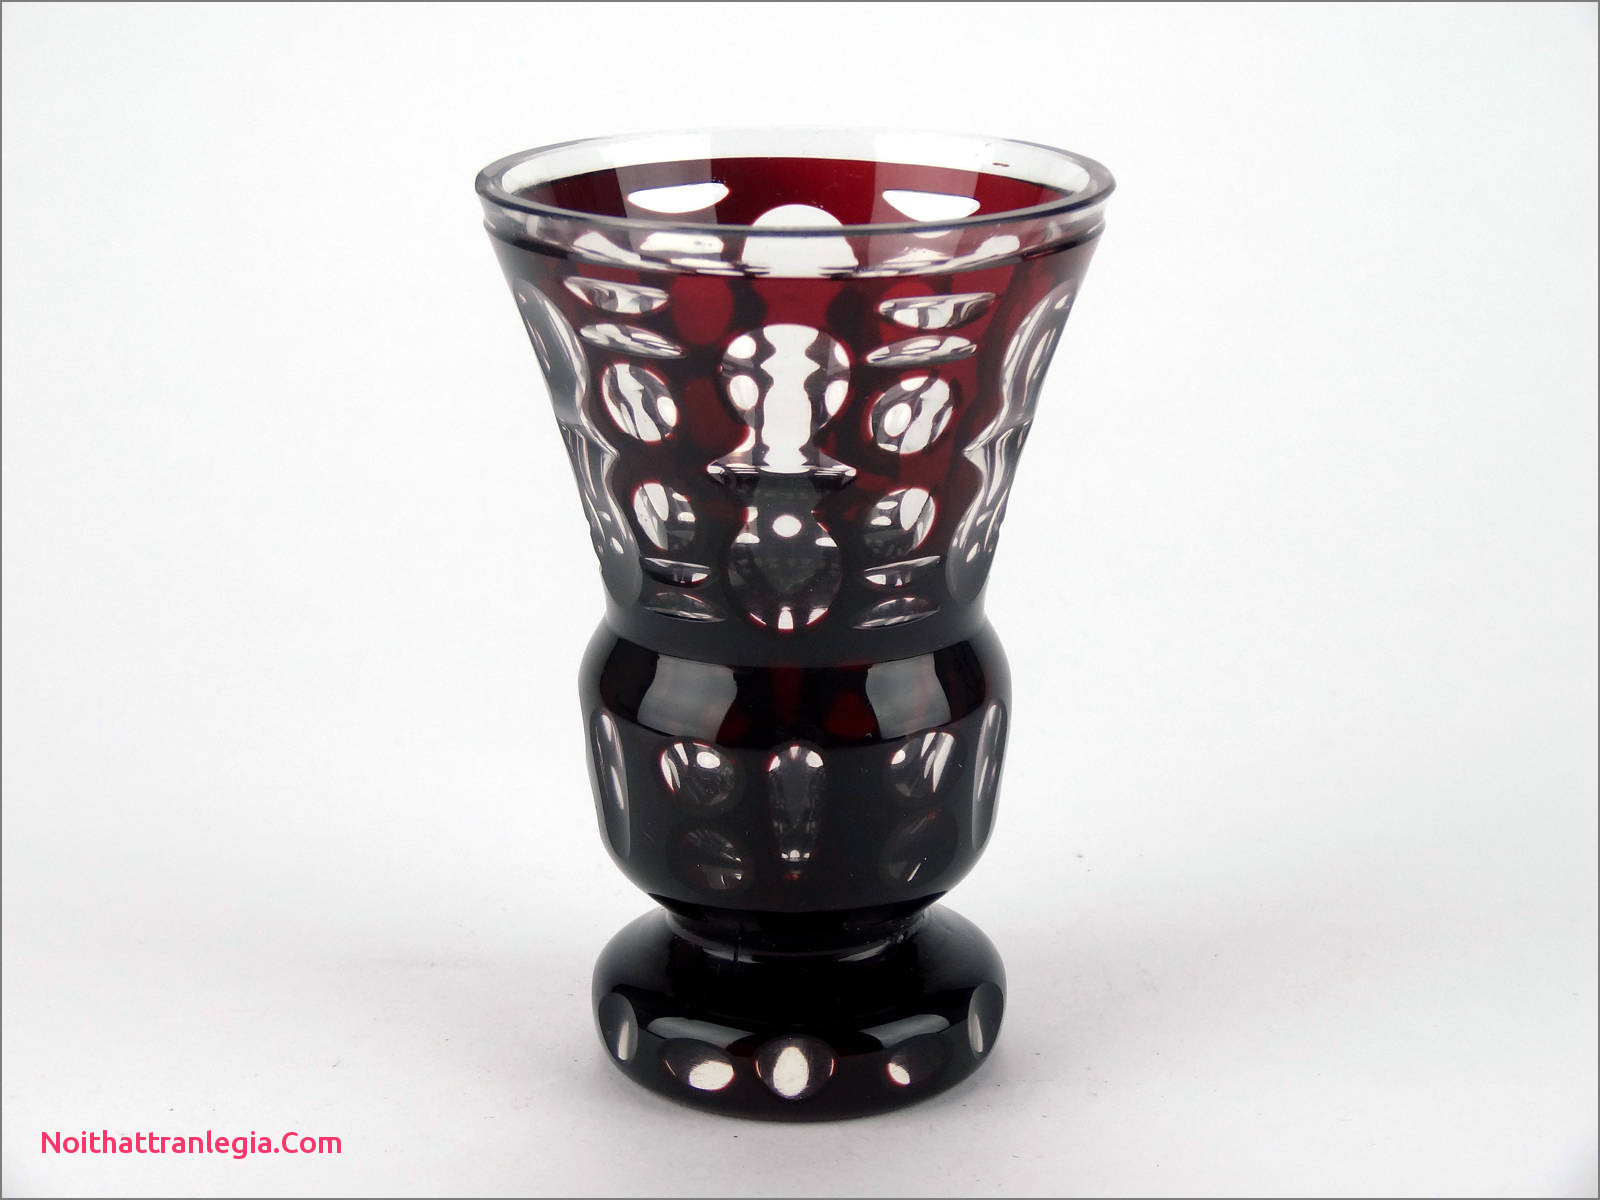 10 Perfect Red Mercury Glass Vase 2022 free download red mercury glass vase of 20 cut glass antique vase noithattranlegia vases design with antique c1910 bohemian cut to clear red glass vase czech ruby red cut glass goblet